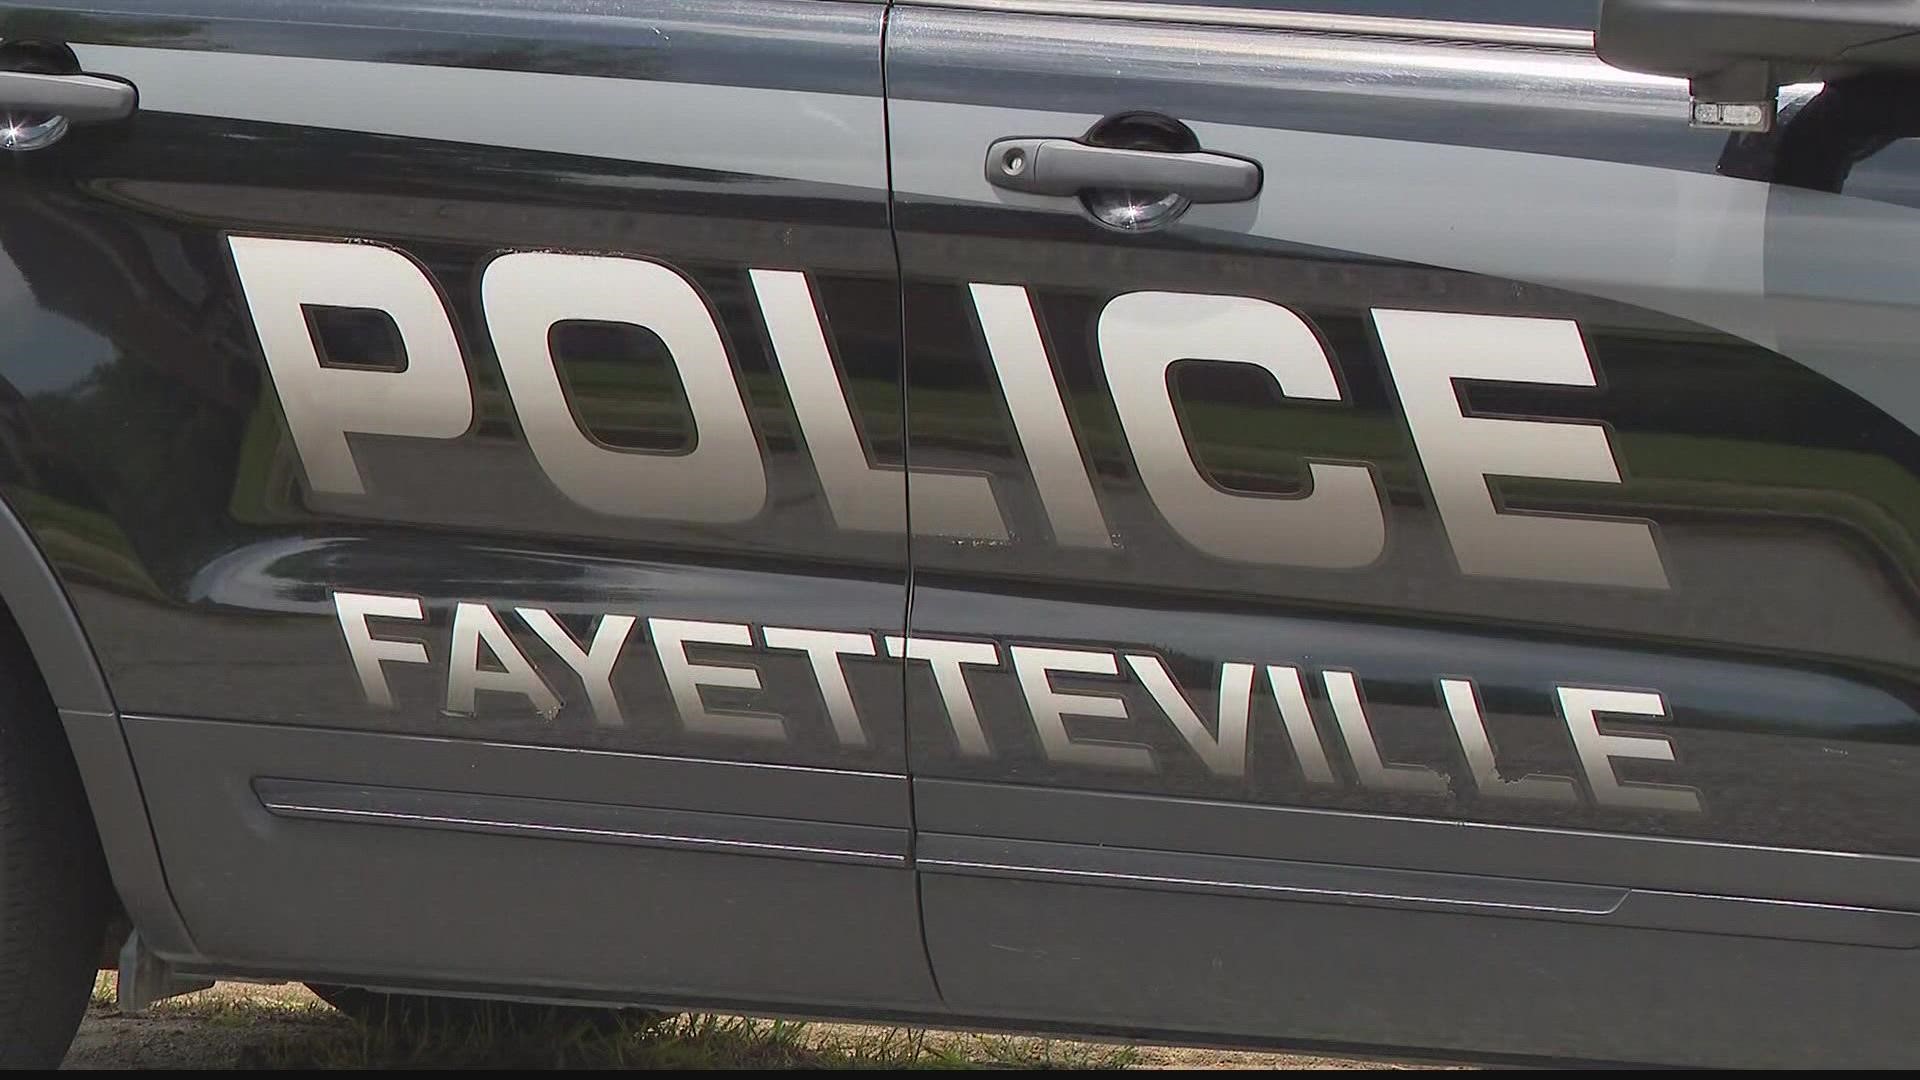 A man who runs a shelter in Fayetteville is demanding to see body camera video.